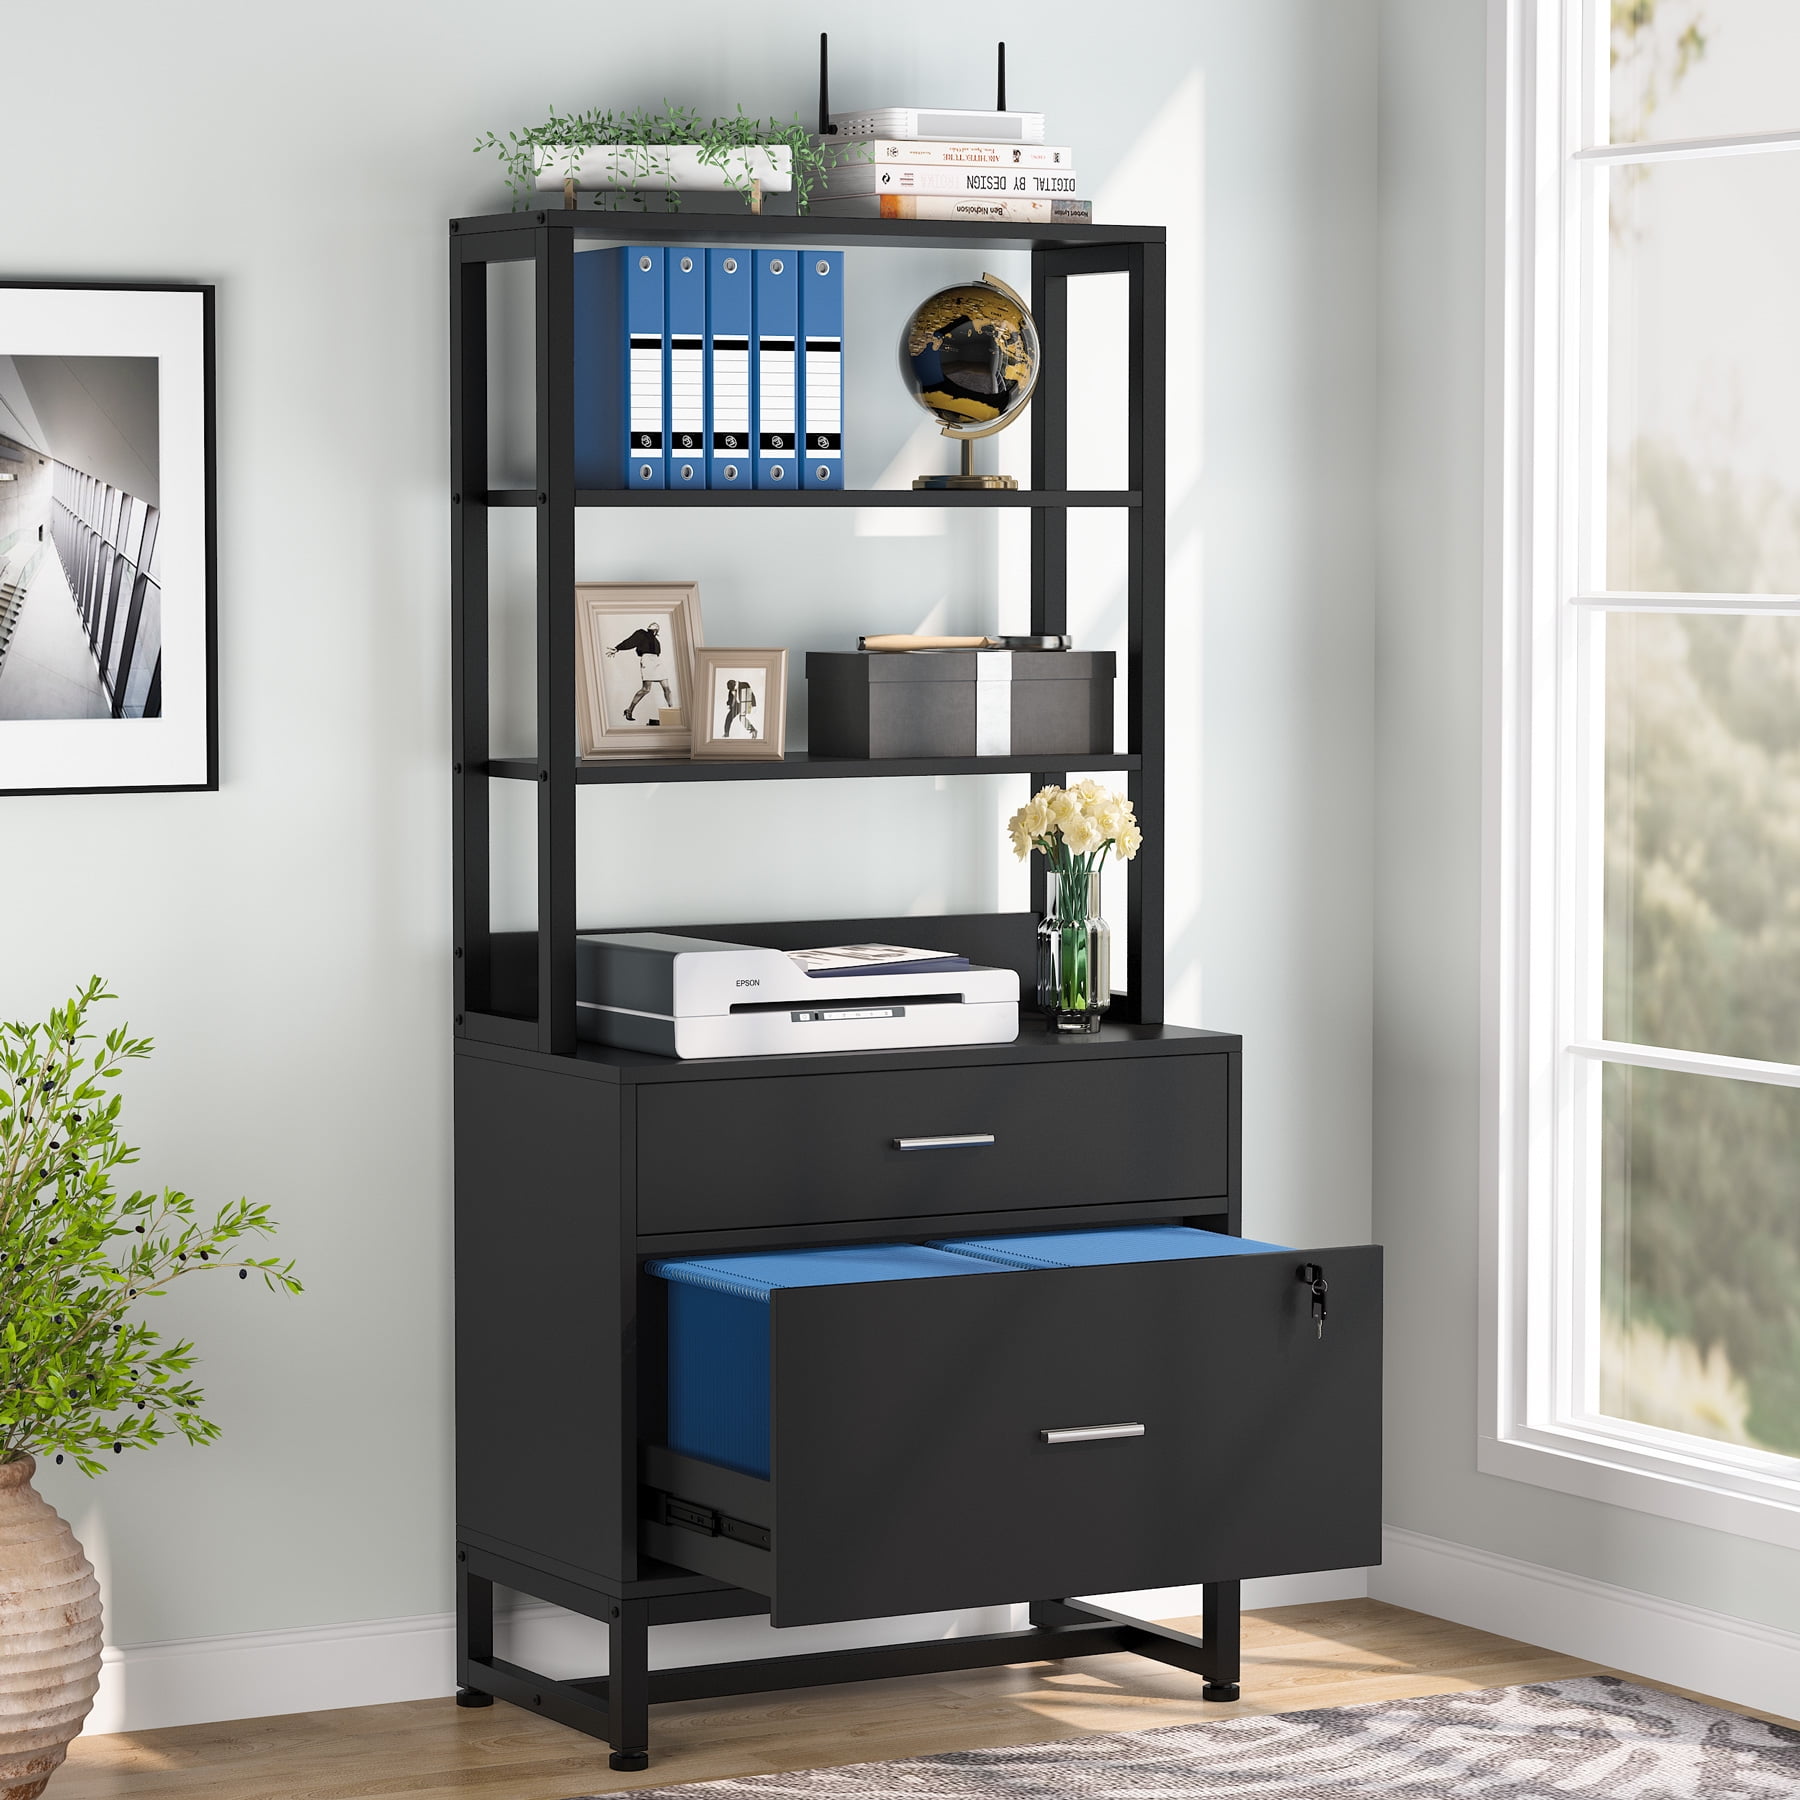 Details about   Audio Video Rack Tower Storage Stand Shelf Stereo Equipment Cabinet Table 